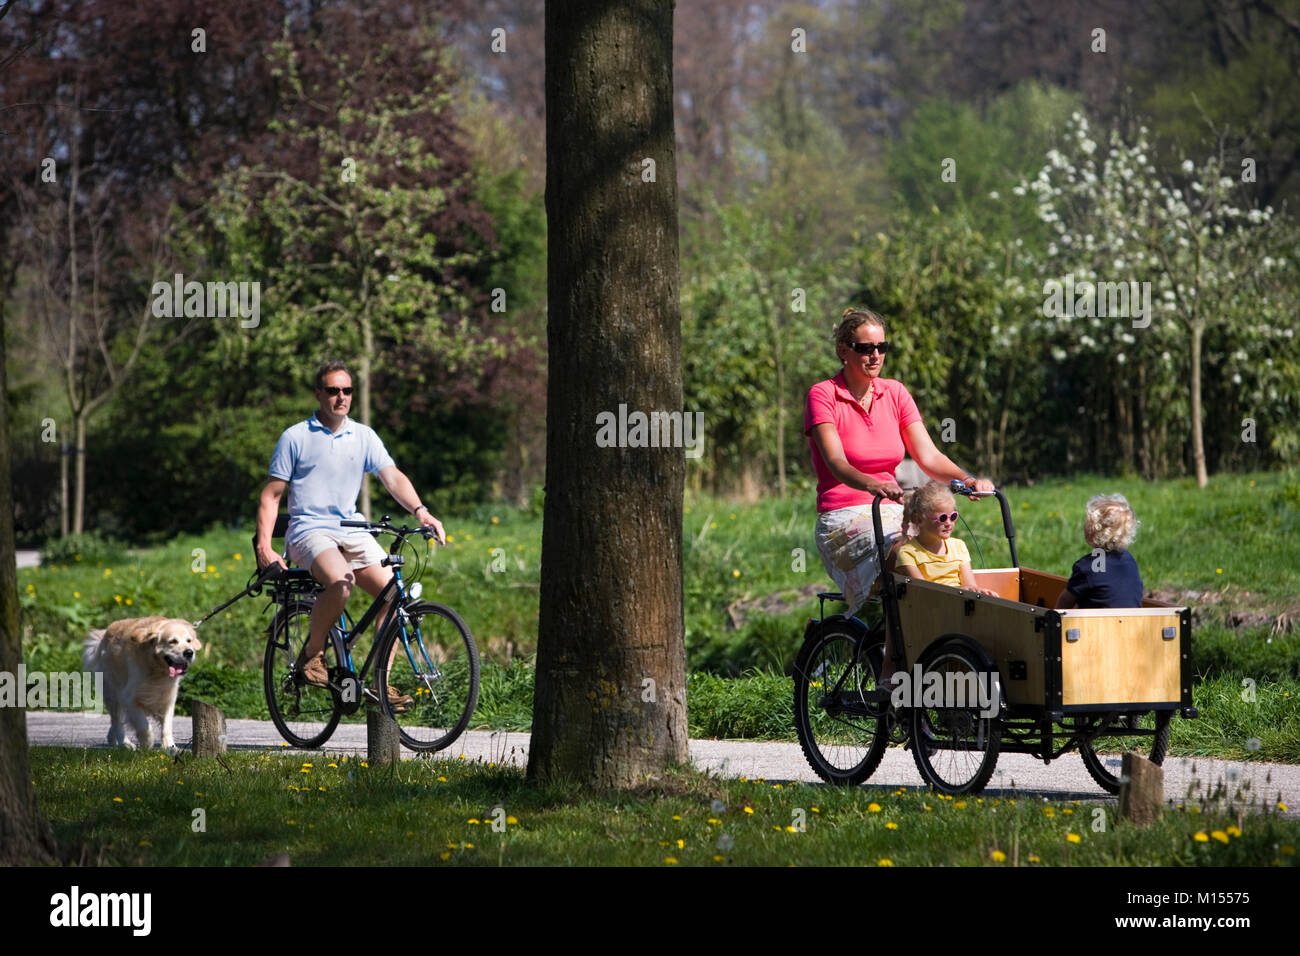 The Netherlands, 's-Graveland. Mother and 2 children on adapted bicycle. Father and Golden Retriever dog. Stock Photo